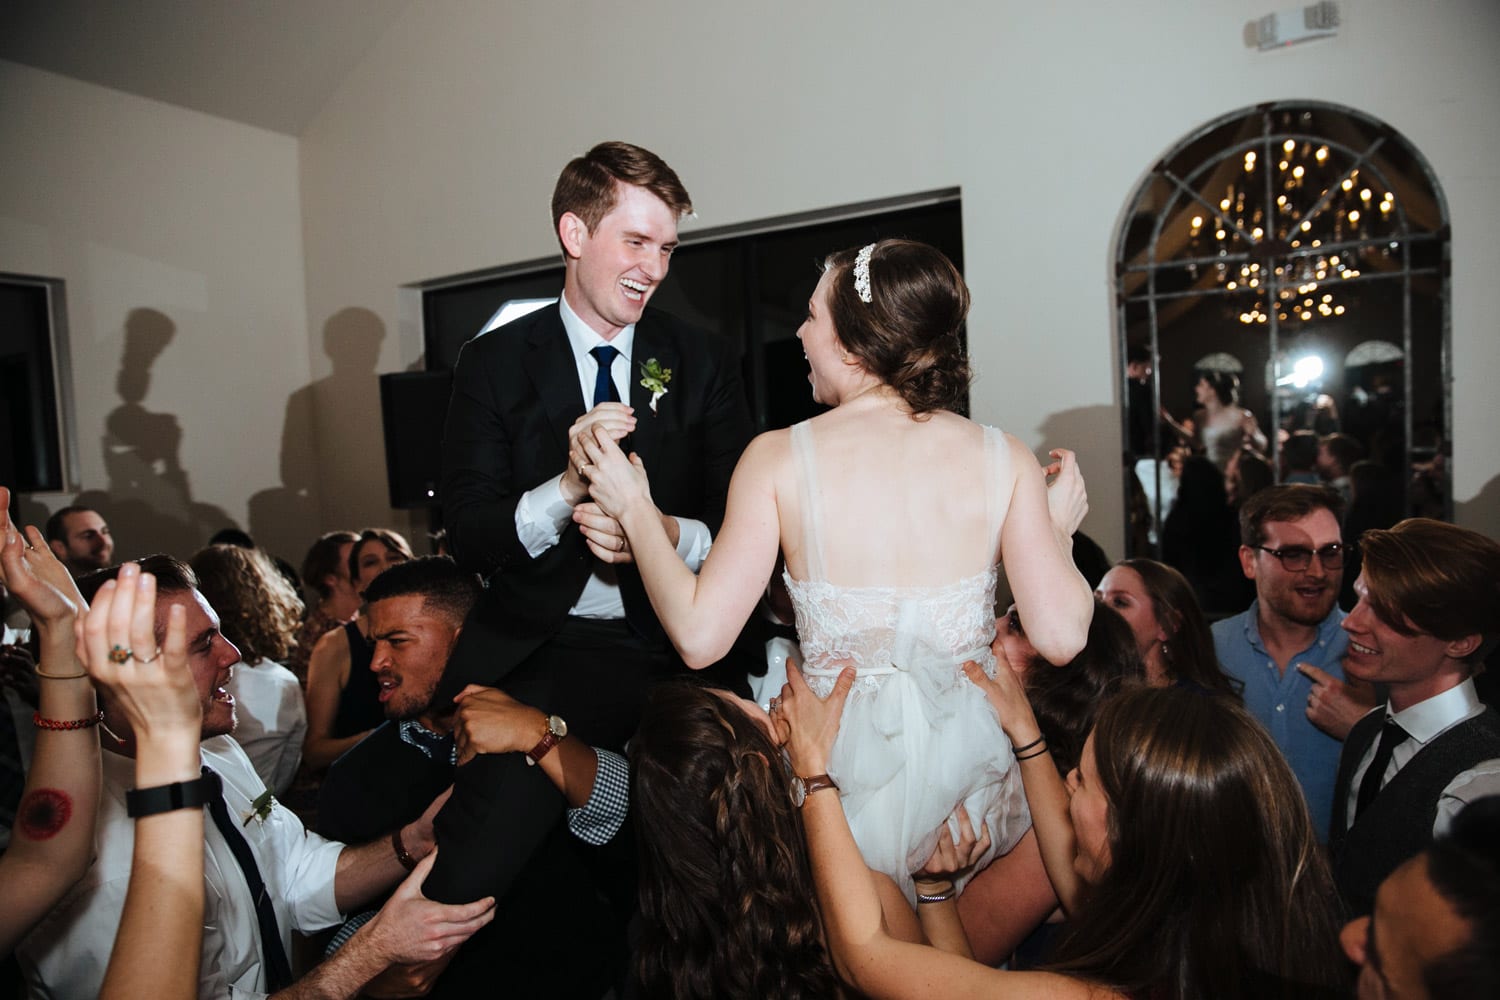 Bride and groom are carried on dance floor